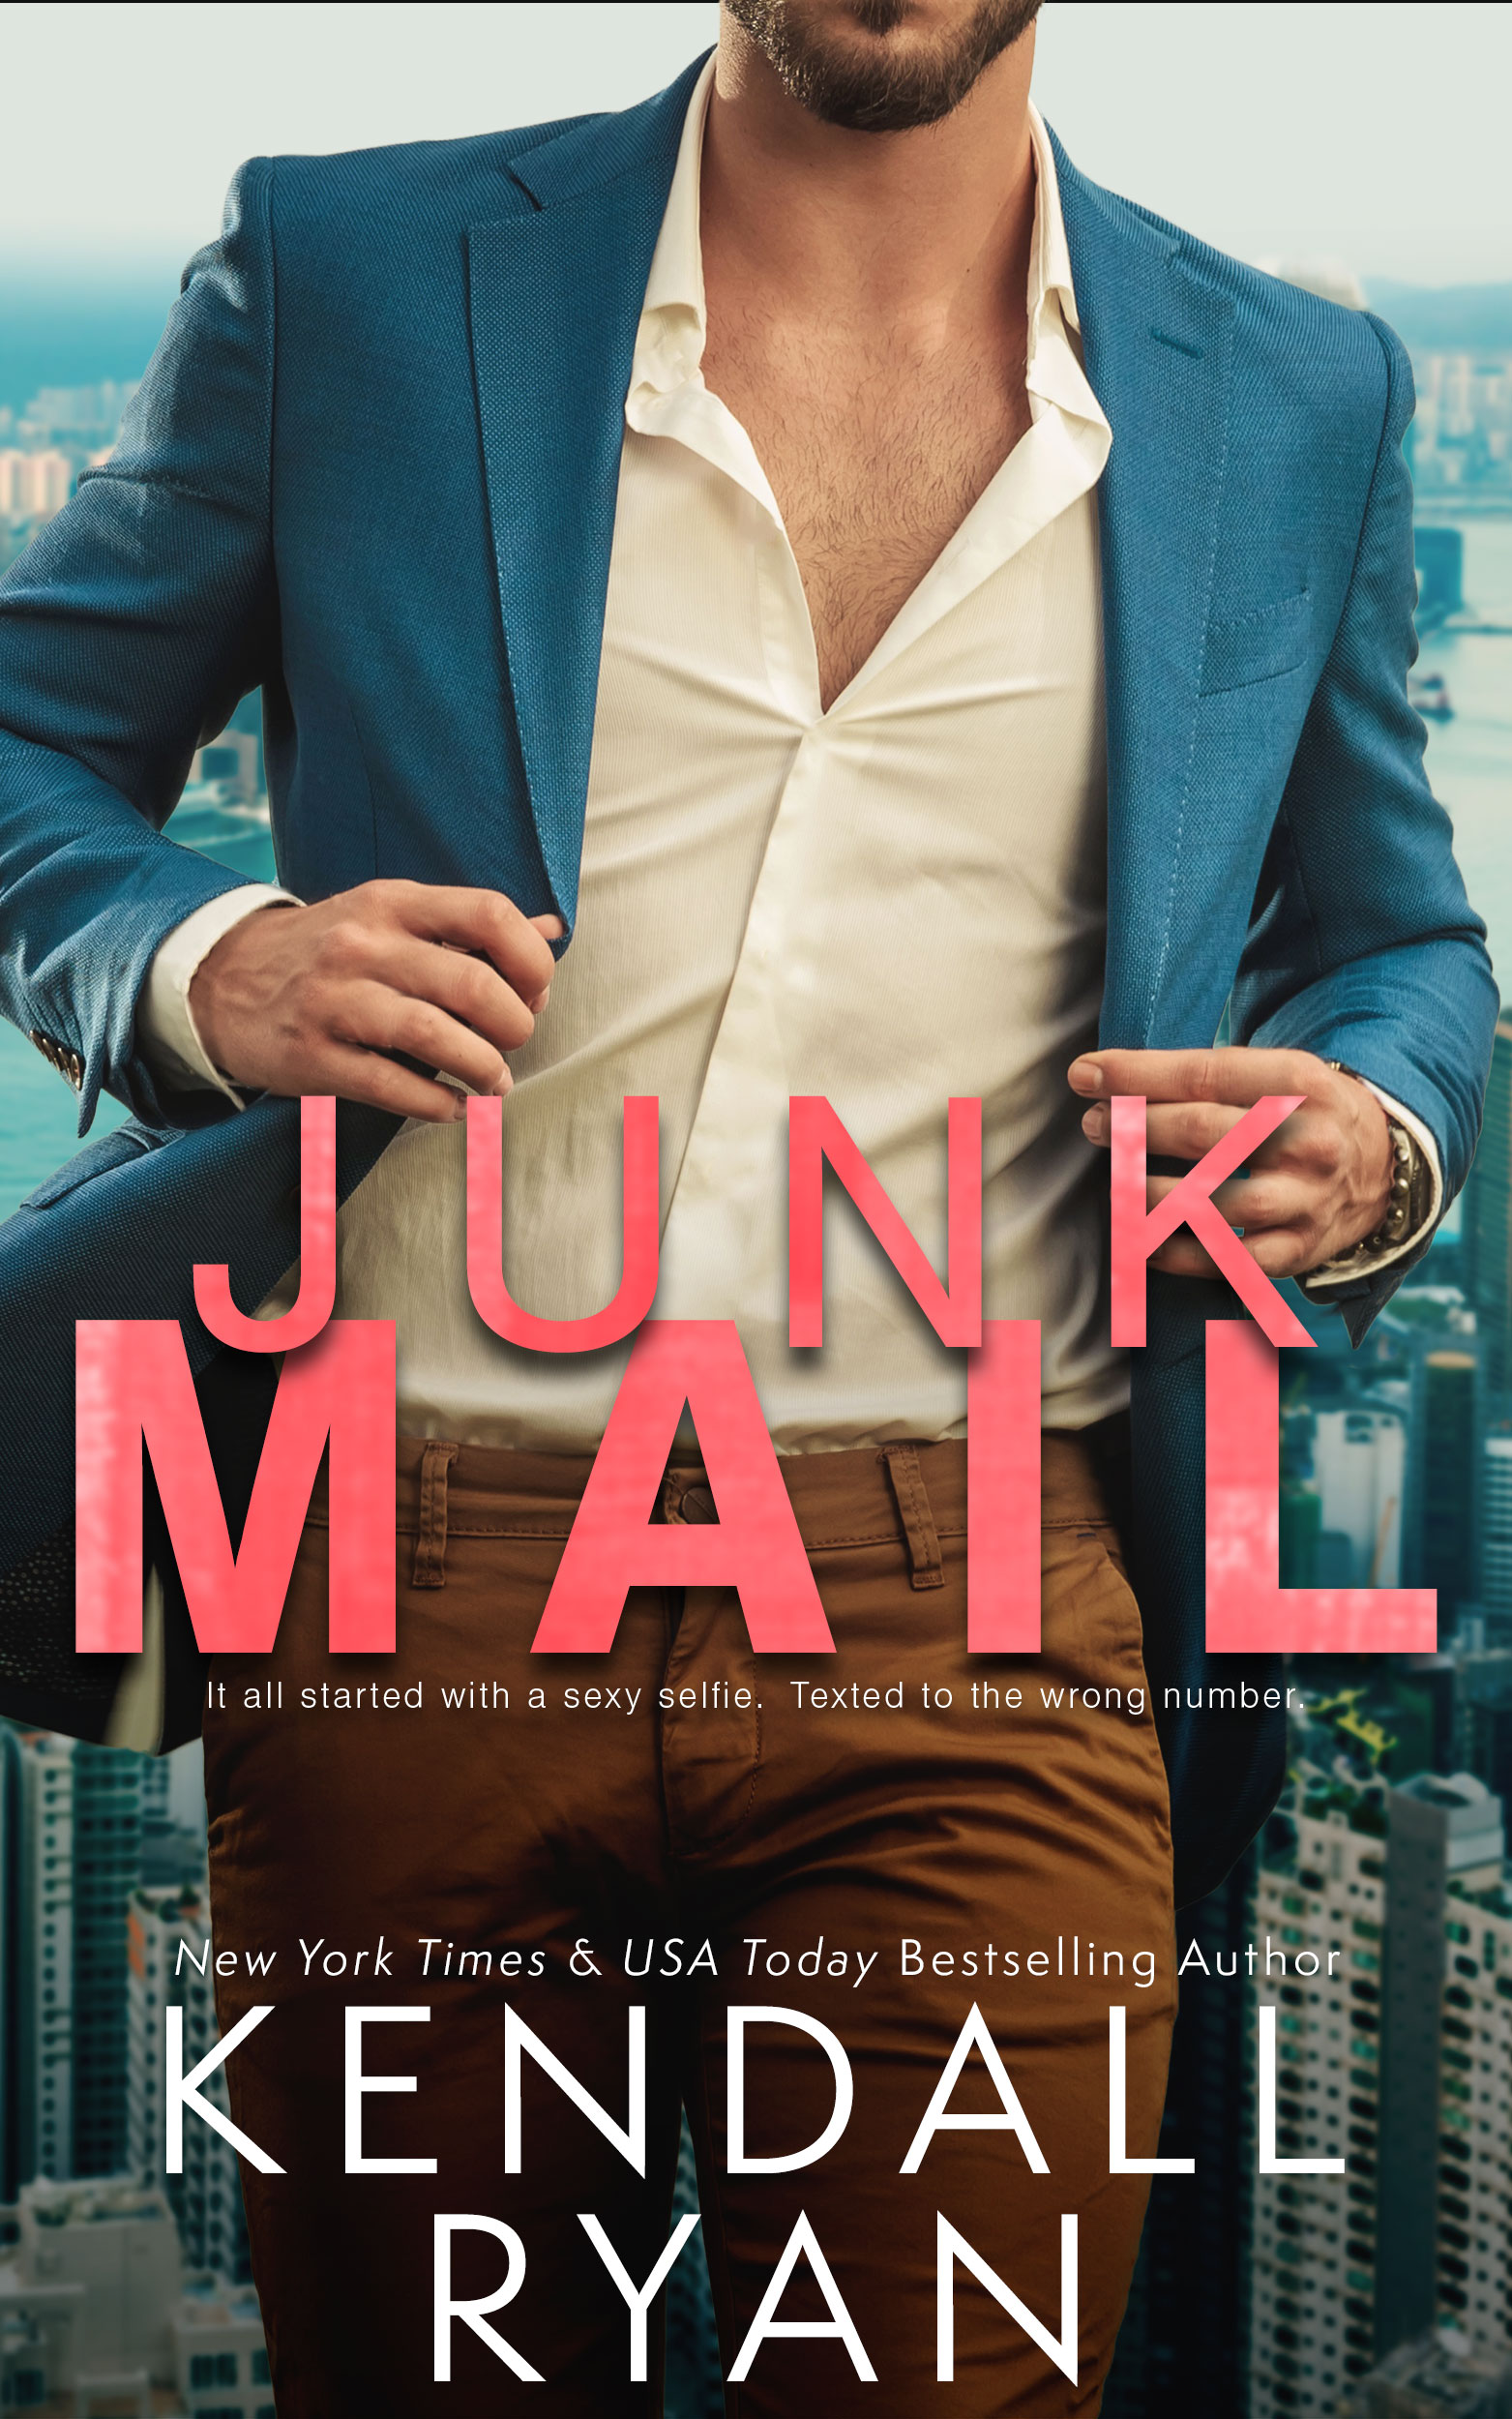 Junk Mail by Kendall Ryan [Review]